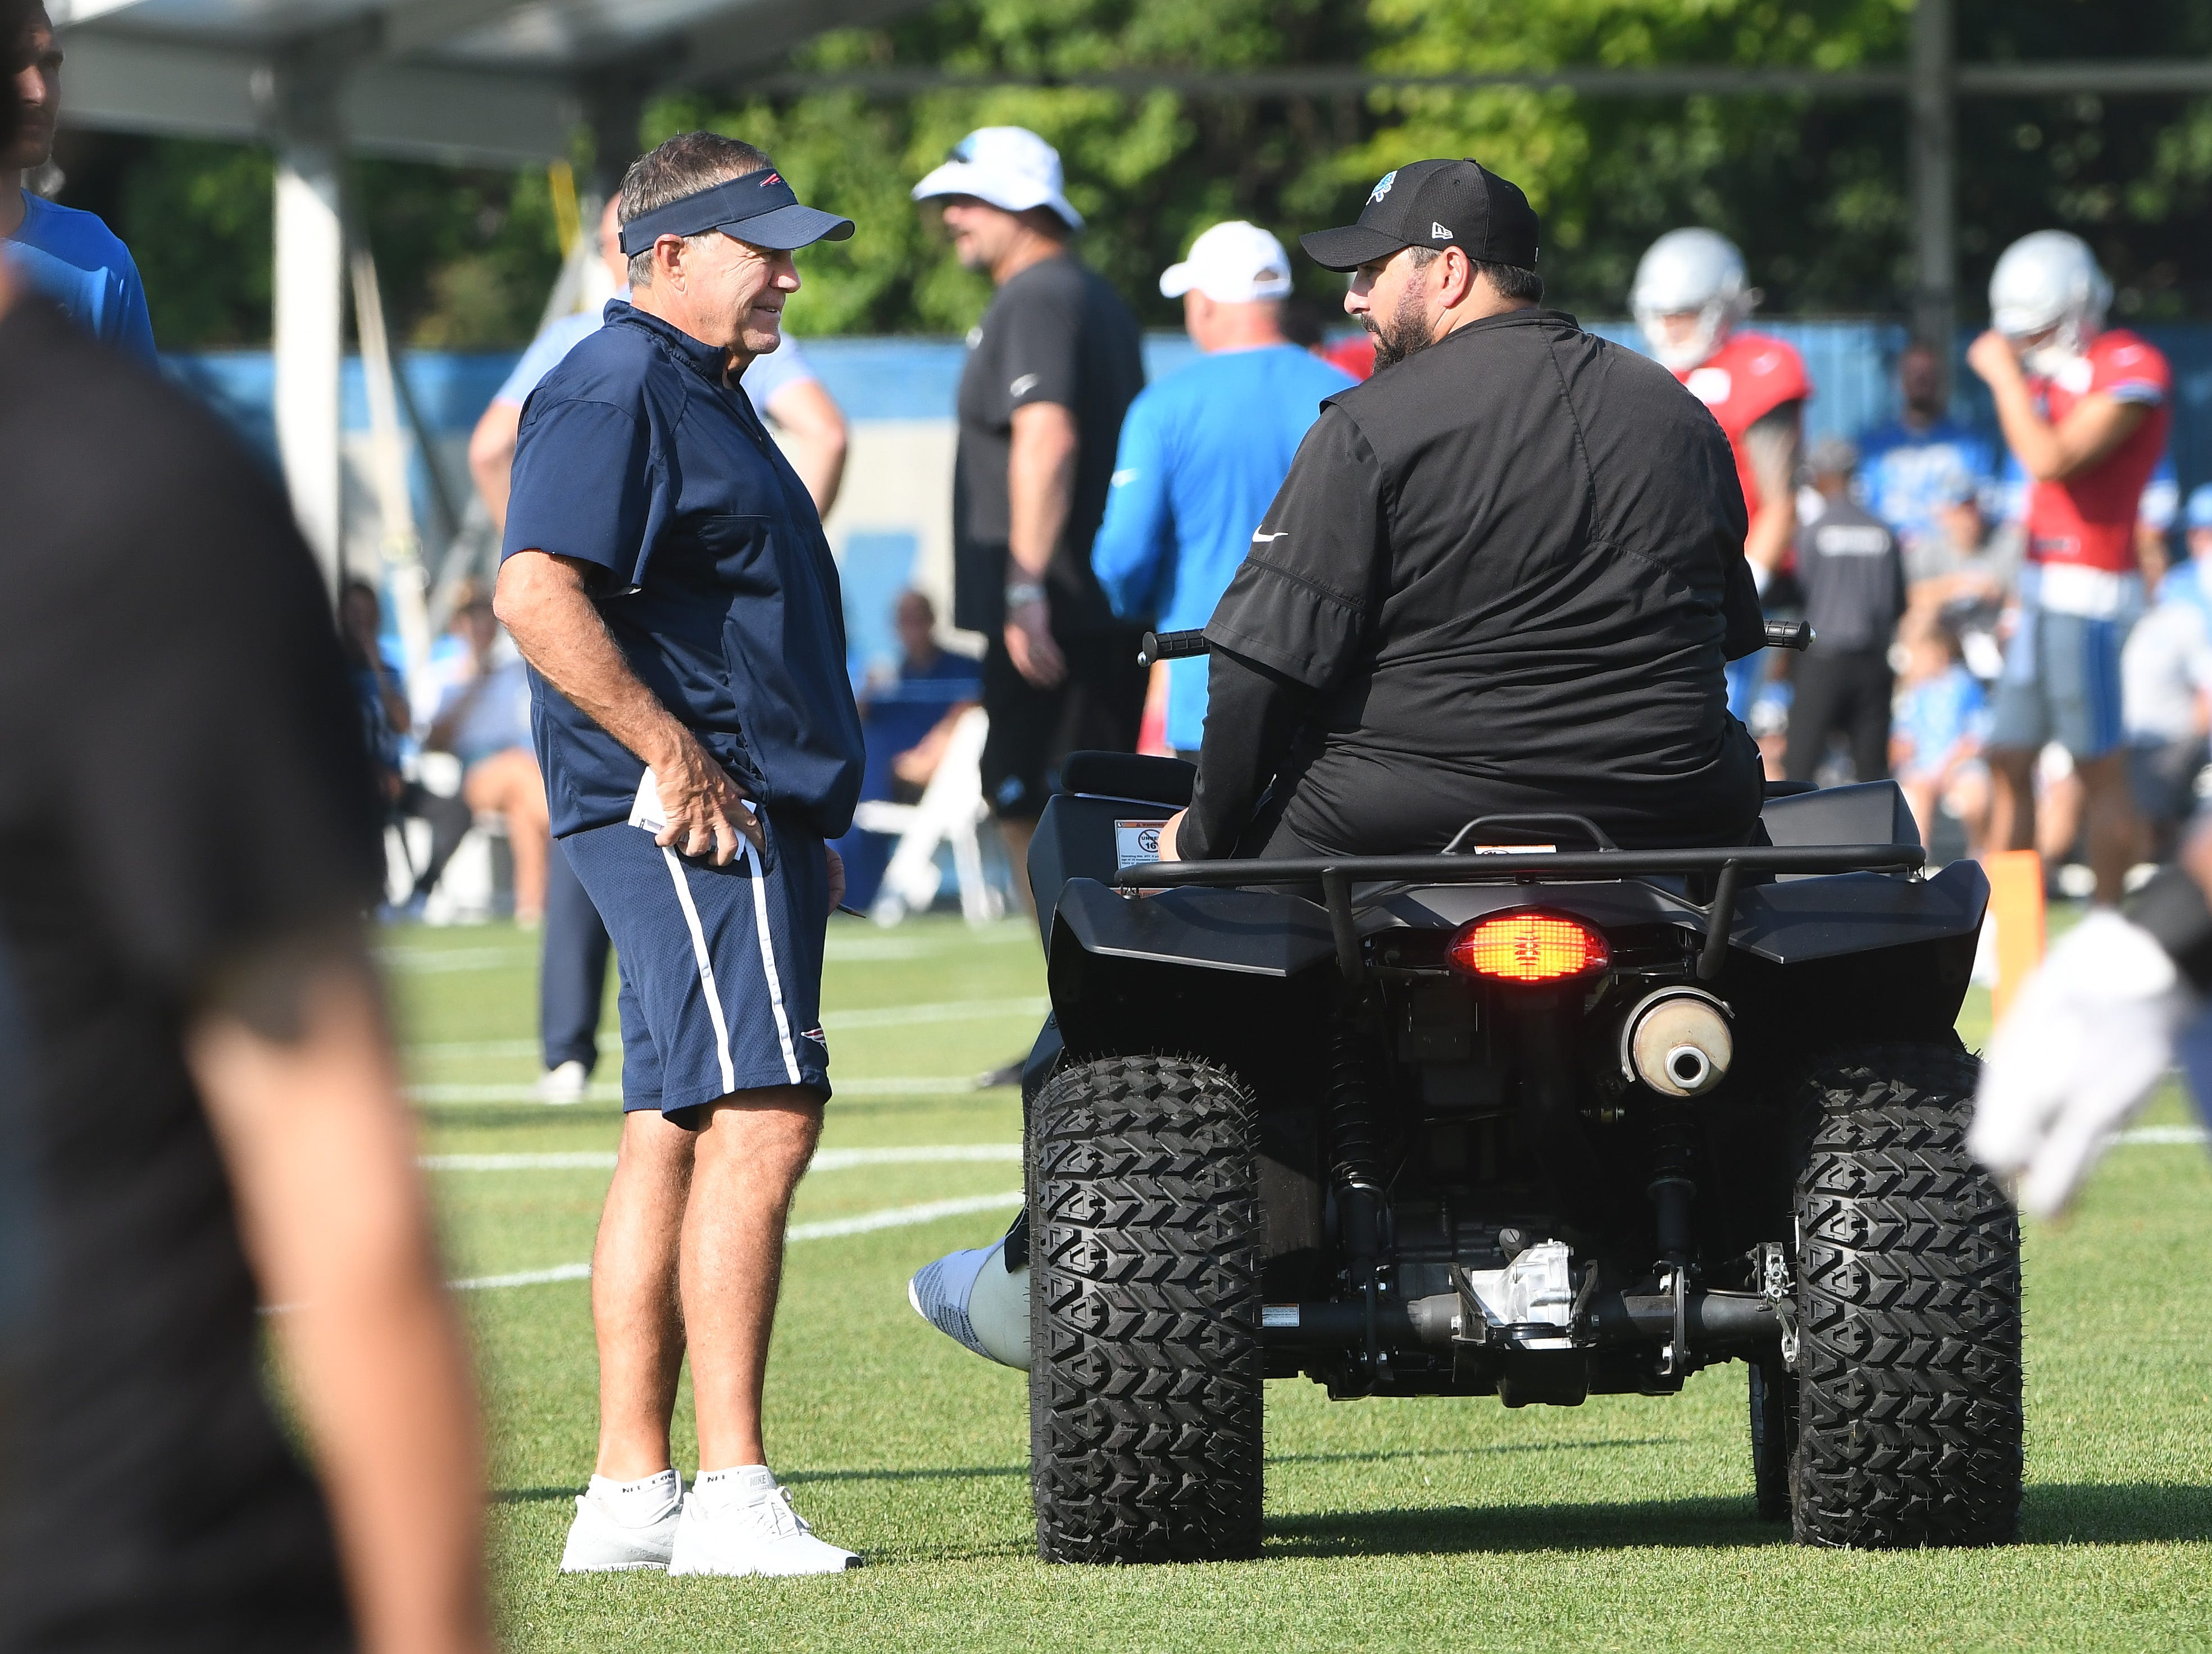 Patriots head coach Bill Belichick talks with one of his former coaches, Lions head coach Matt Patricia as the players make their way onto the field. Lions, New England Patriots combined practice at the training facility in Allen Park, Michigan on August 5, 2019.